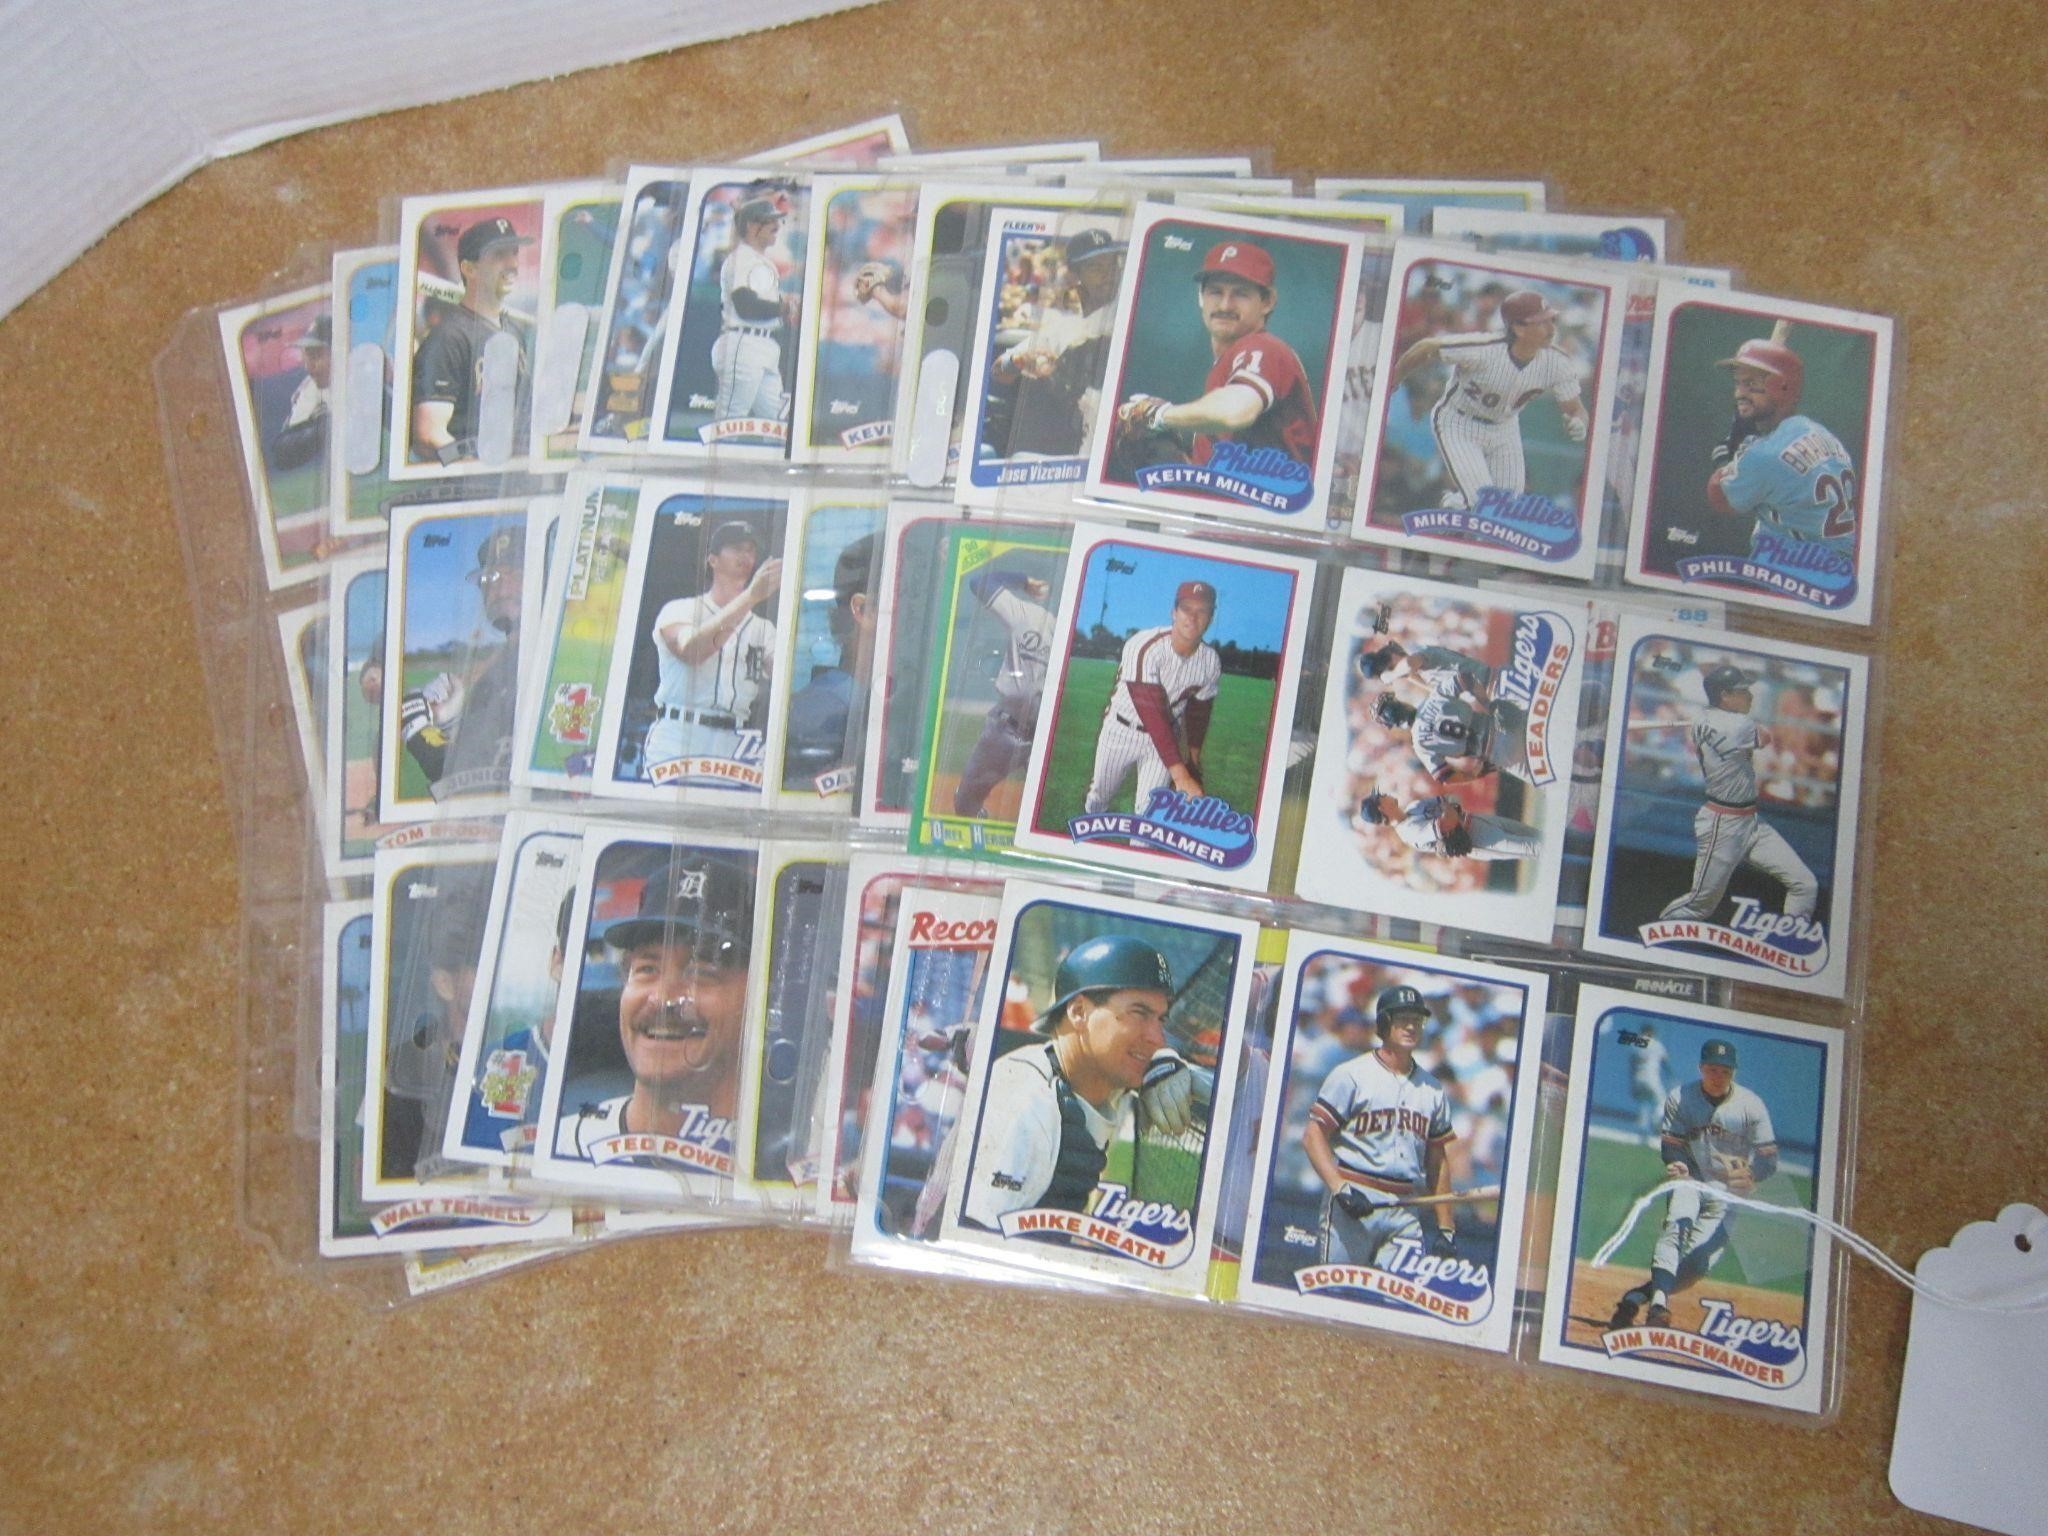 COLLECTION OF COLLECTIBLE SPORTCARDS